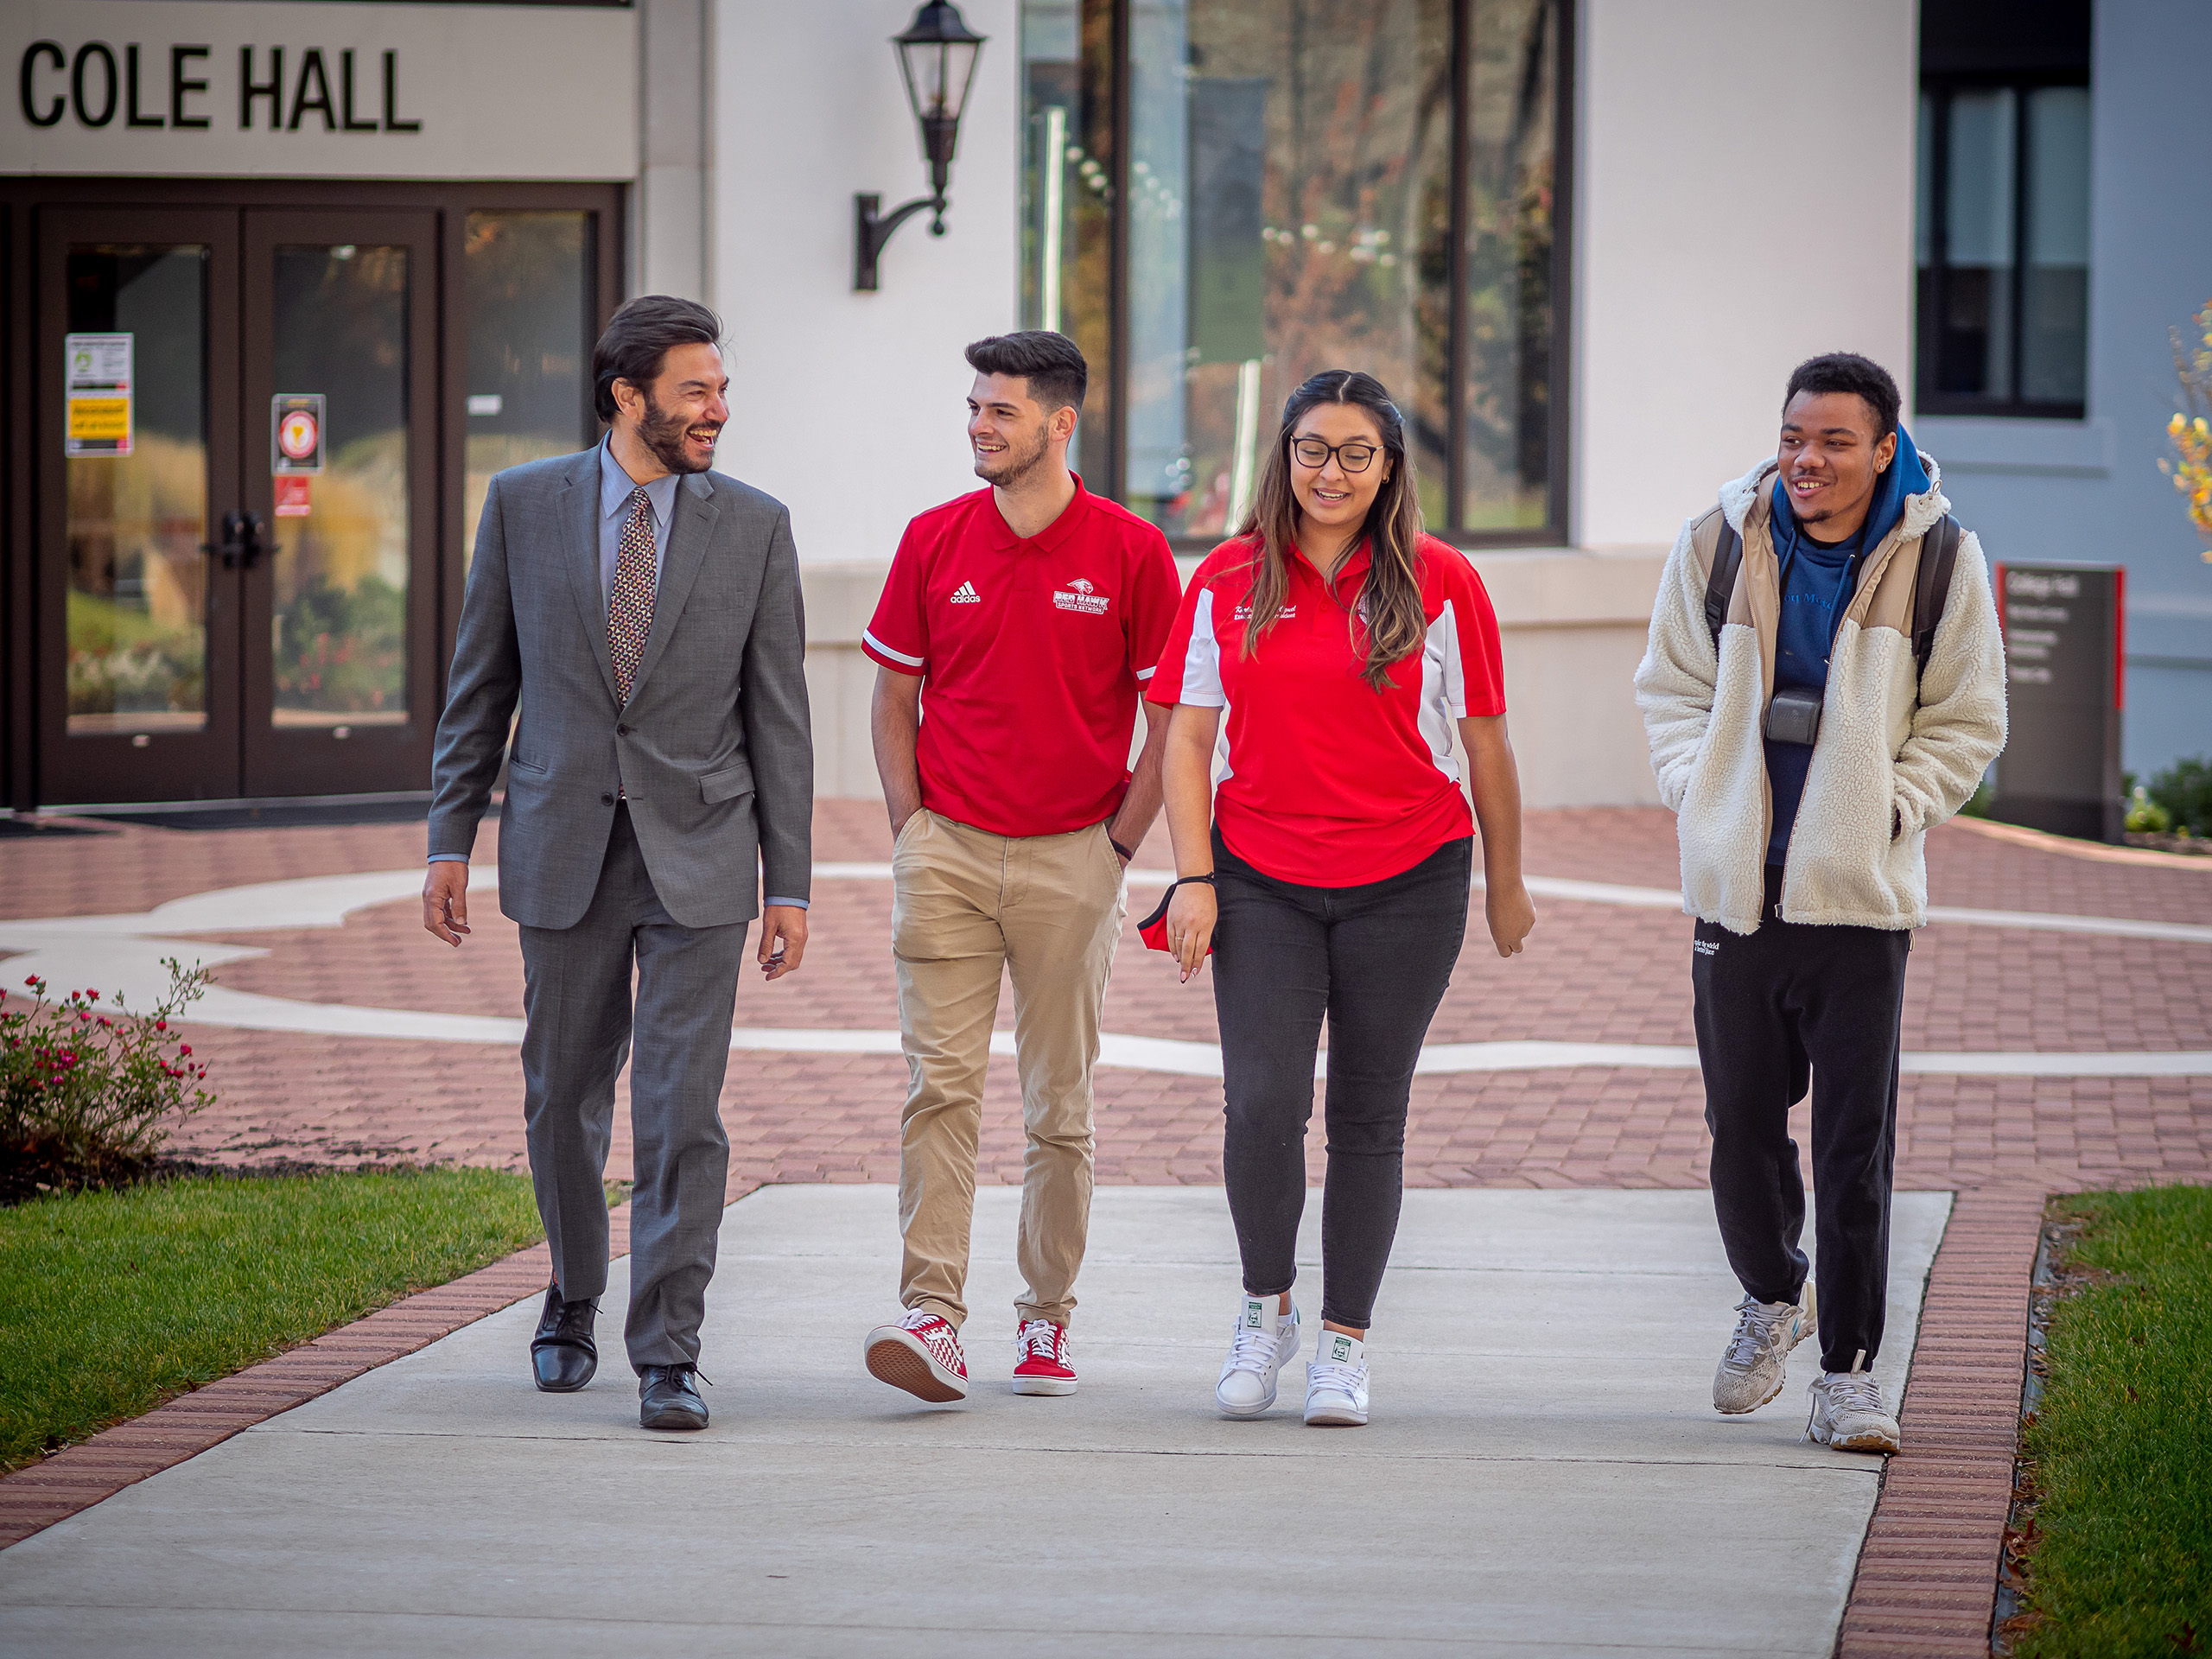 President Koppell walking with students on campus